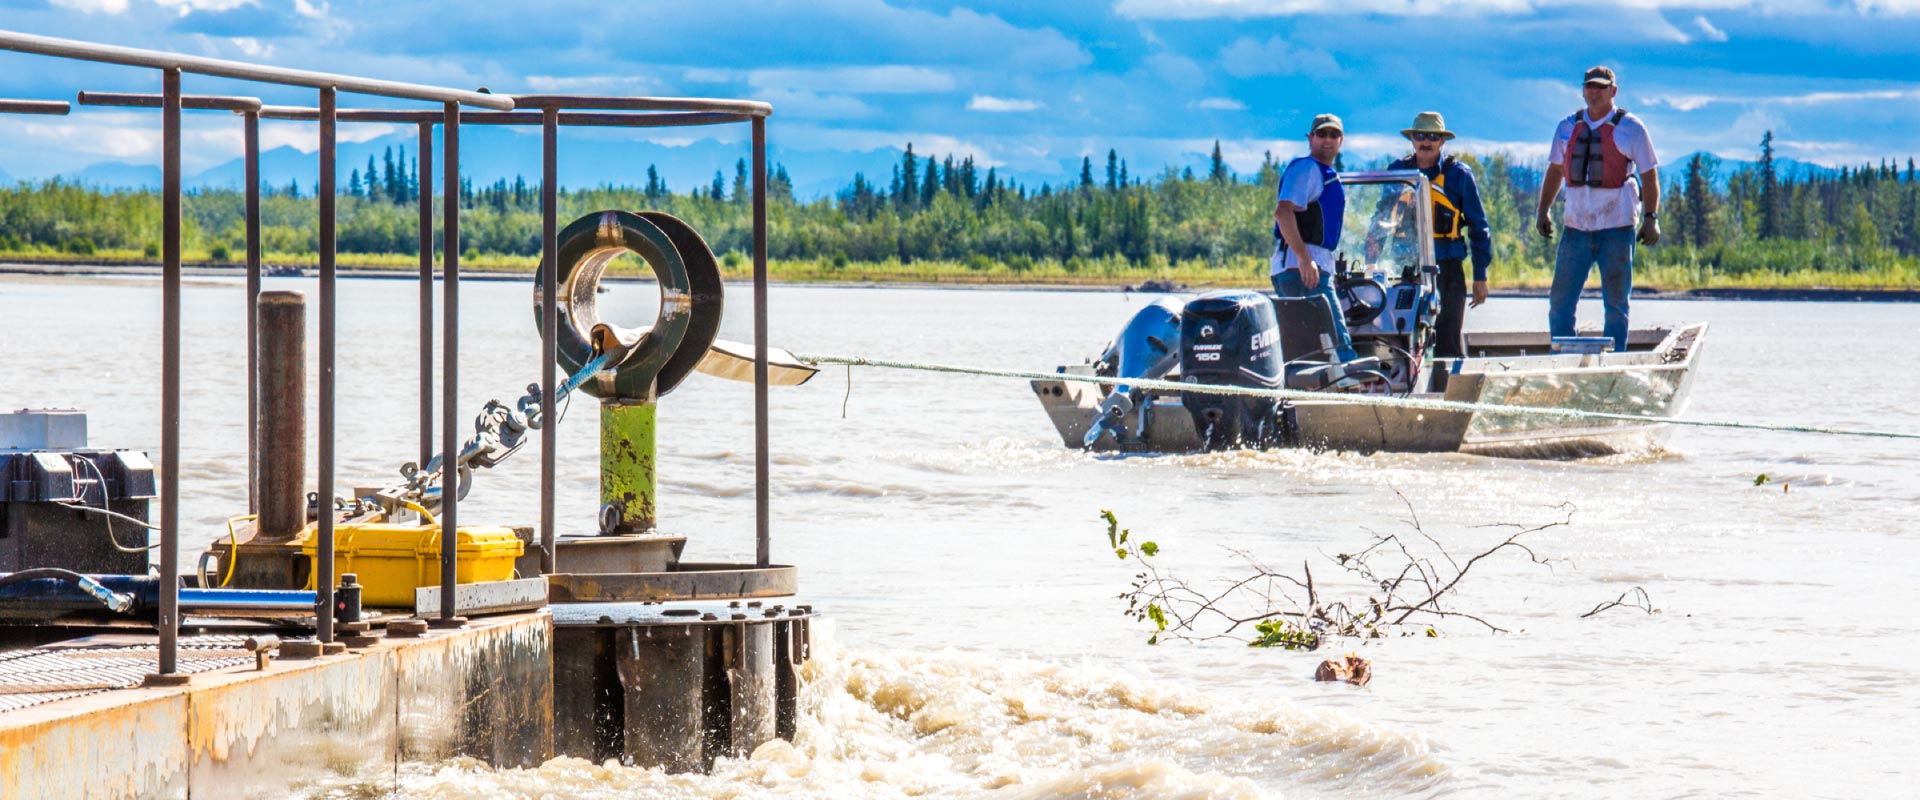 Researchers with UAF's School of Fisheries and Ocean Sciences and the Alaska Center for Energy and Power (ACEP) watch as debris hits a prototype deployment boom on a barge anchored in the Tanana River near Nenana.